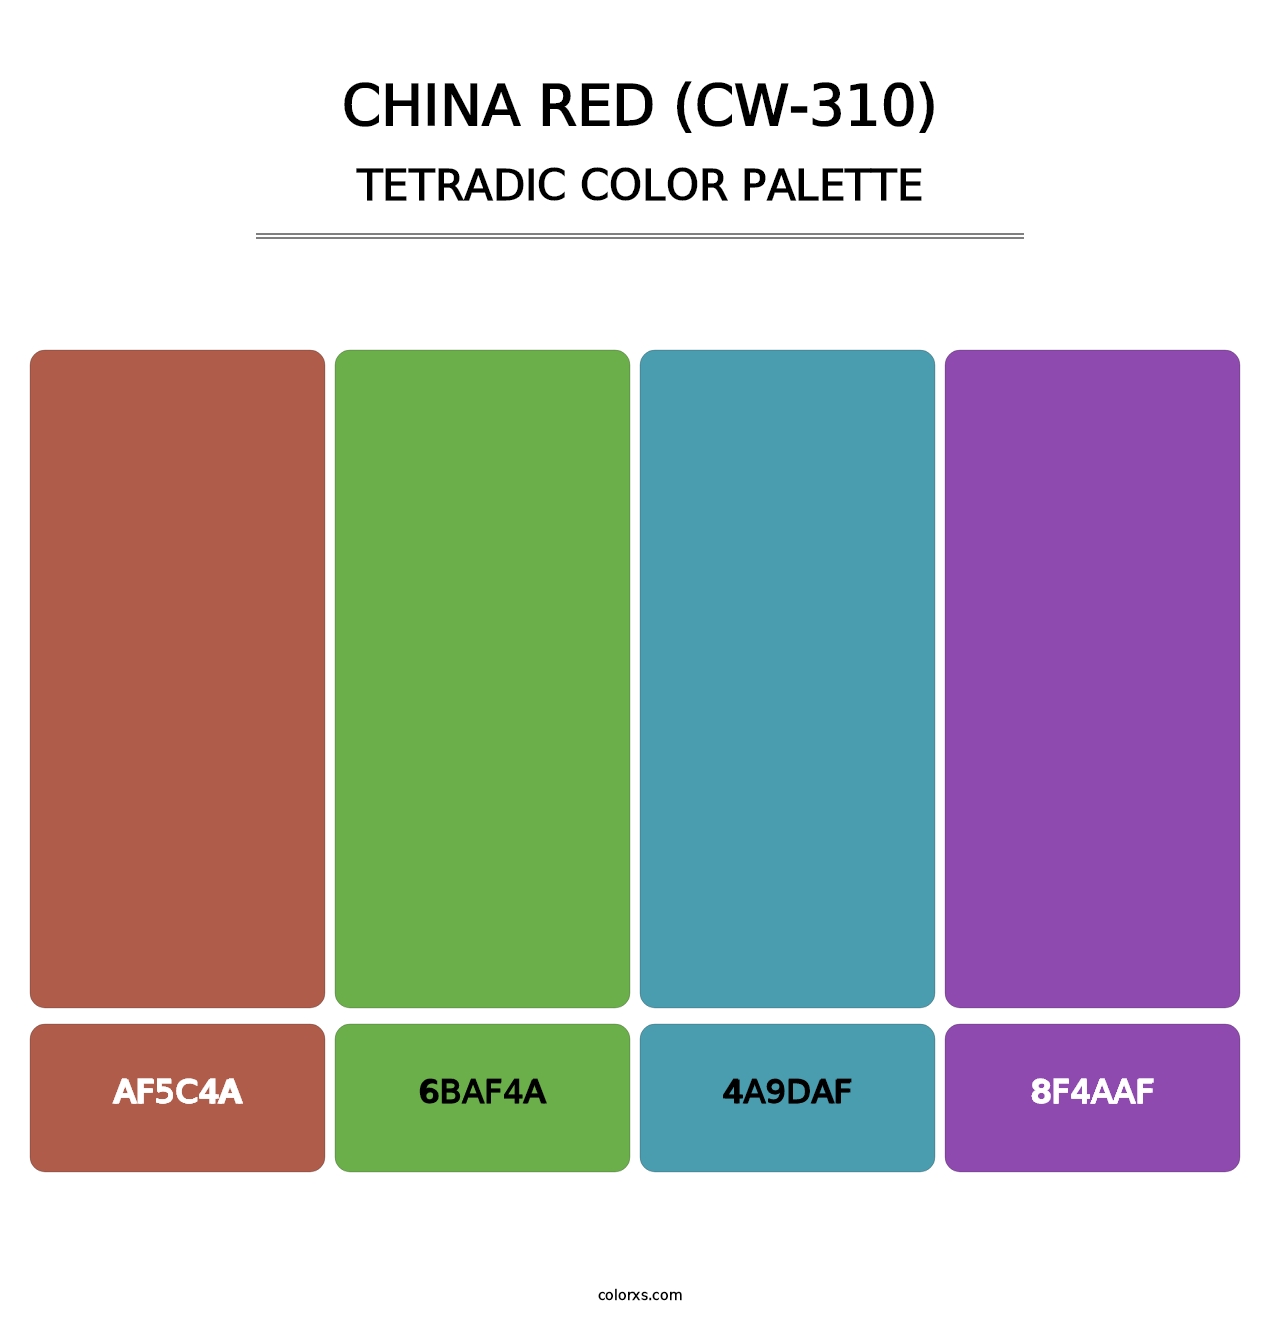 China Red (CW-310) - Tetradic Color Palette